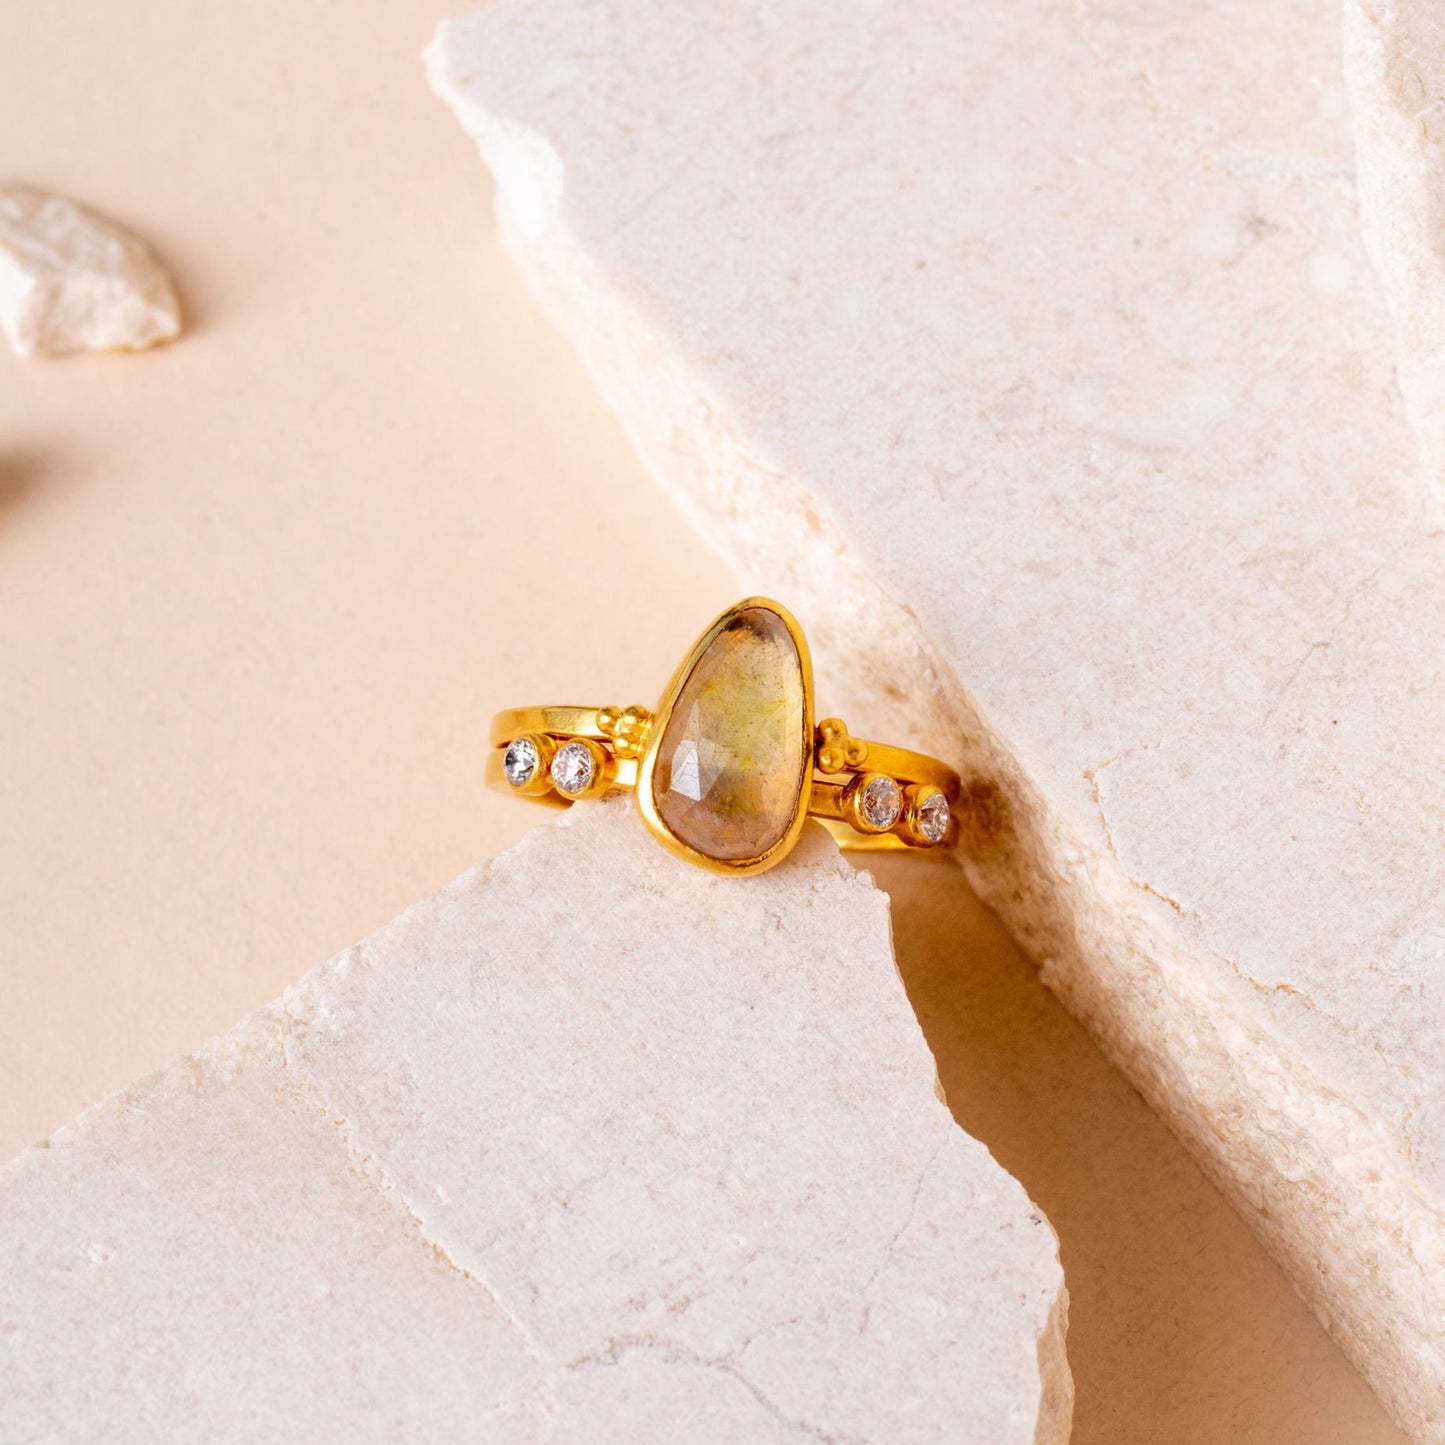 Artisan gold ring featuring a light yellow teardrop sapphire and intricate granulation details.